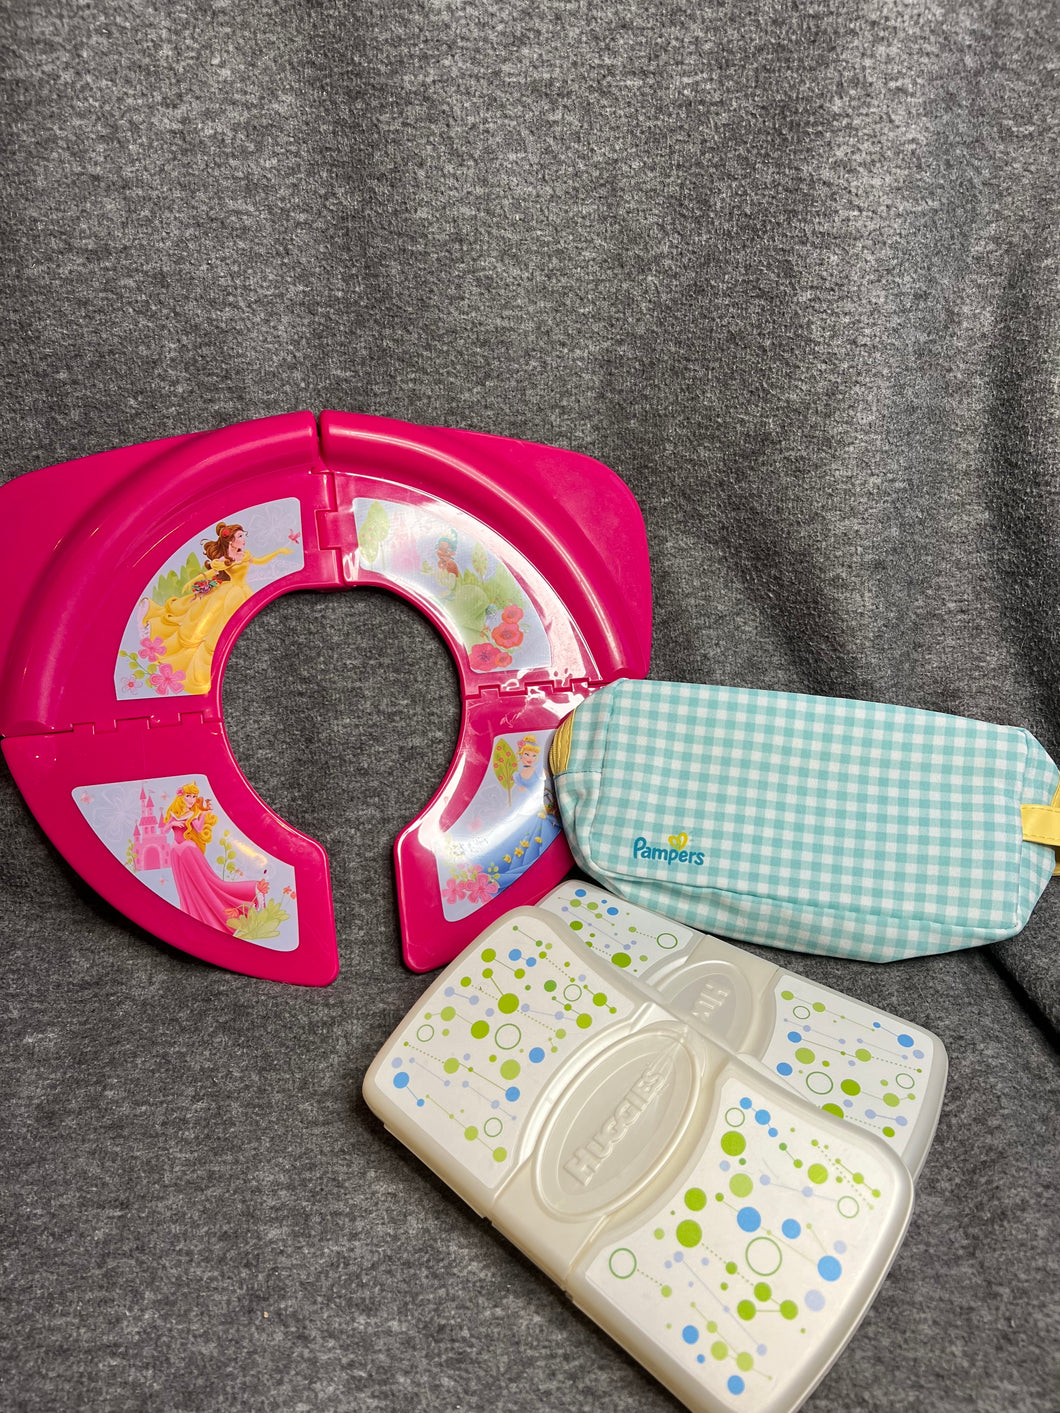 Princess Foldable Potty Seat and Containers for Wipes One Size